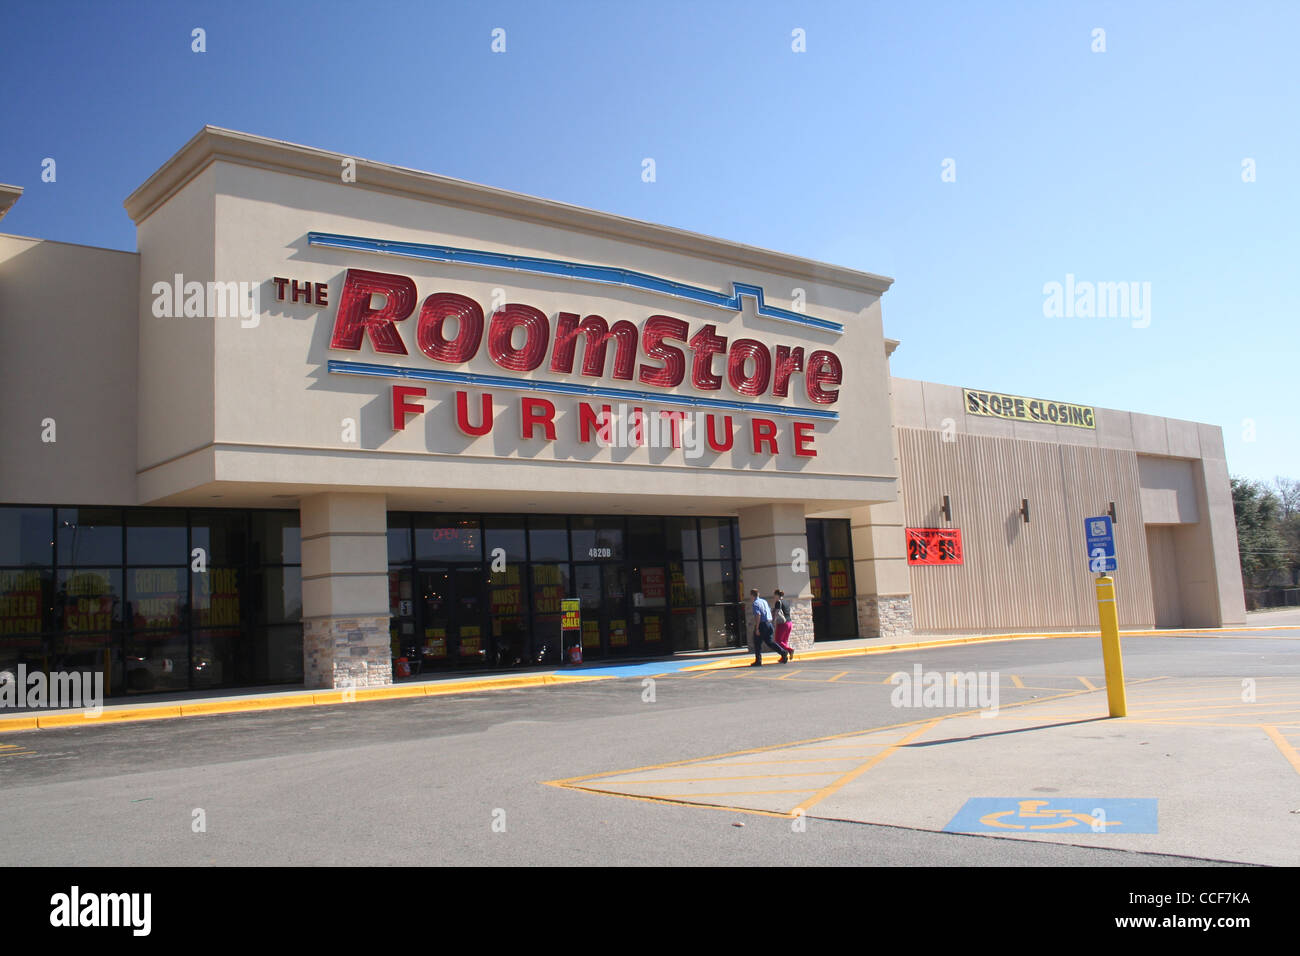 The Roomstore Furniture Store Closing Sale - Tyler, TX - January 2012 Stock Photo